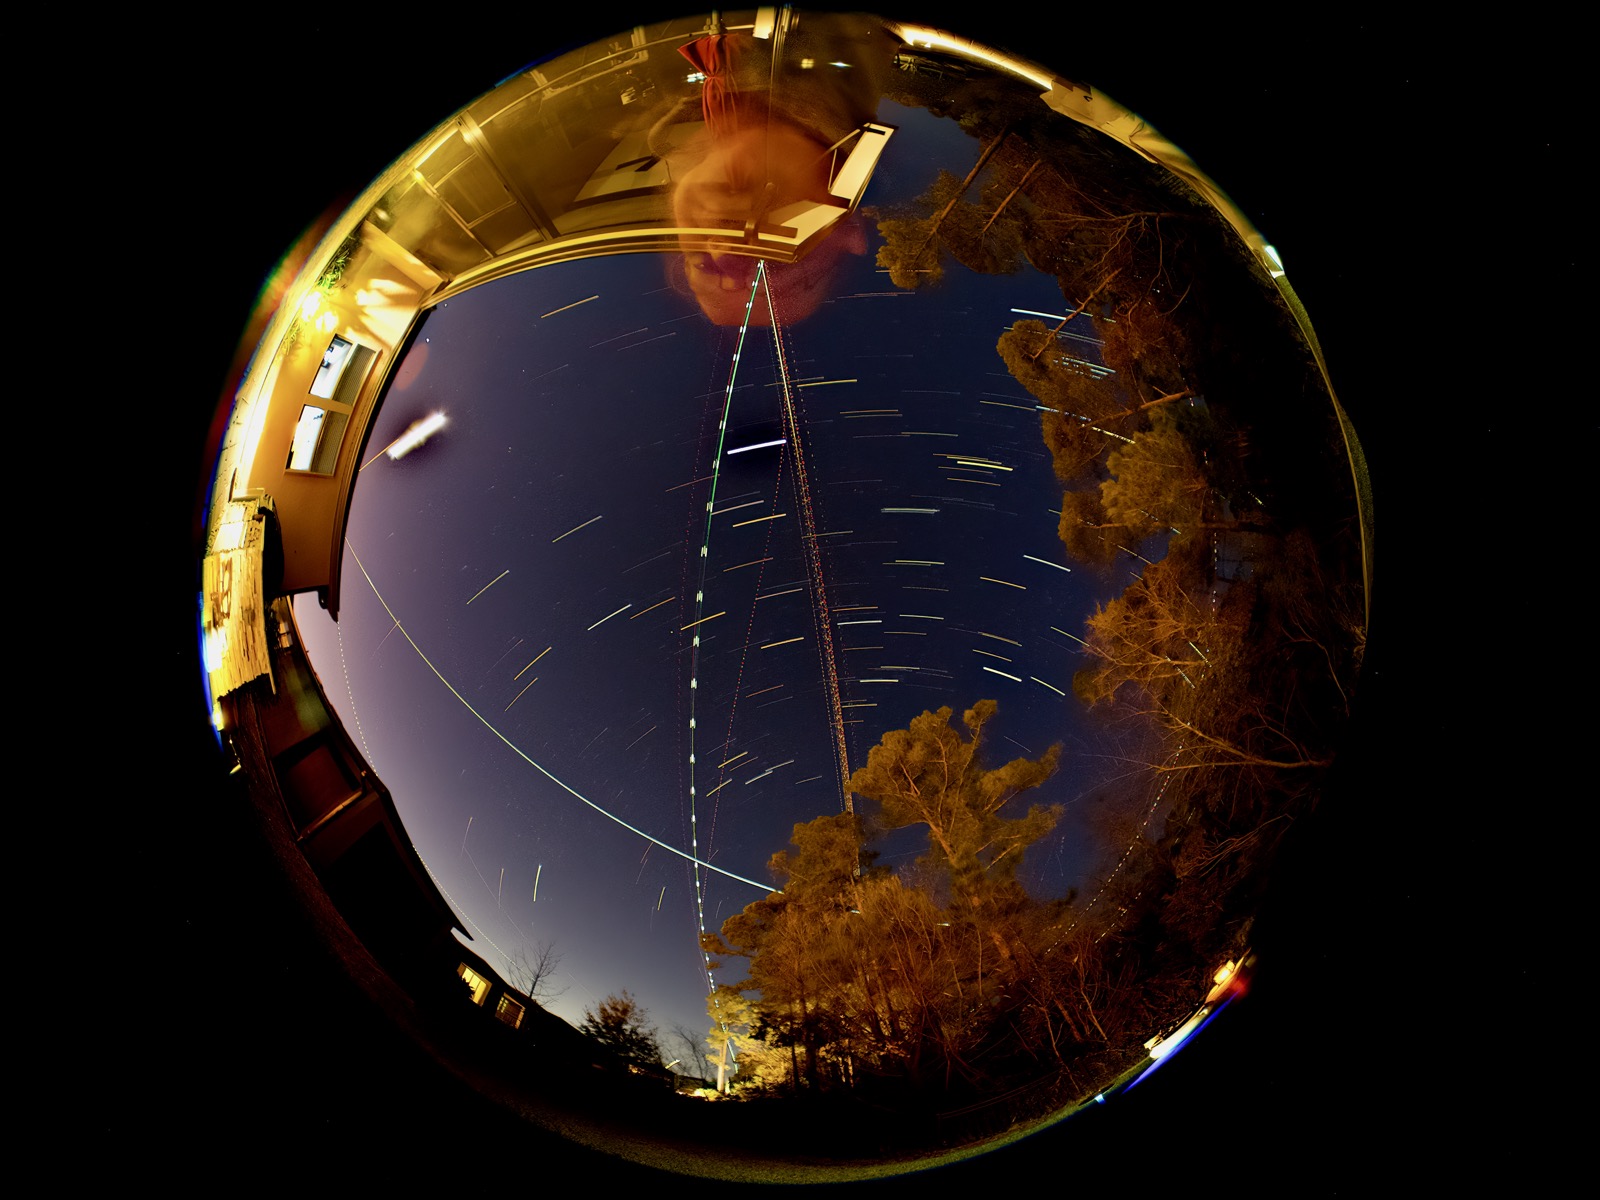 Circular fisheye image of the overhead night sky with star trails, aircraft and the International Space Station overhead.